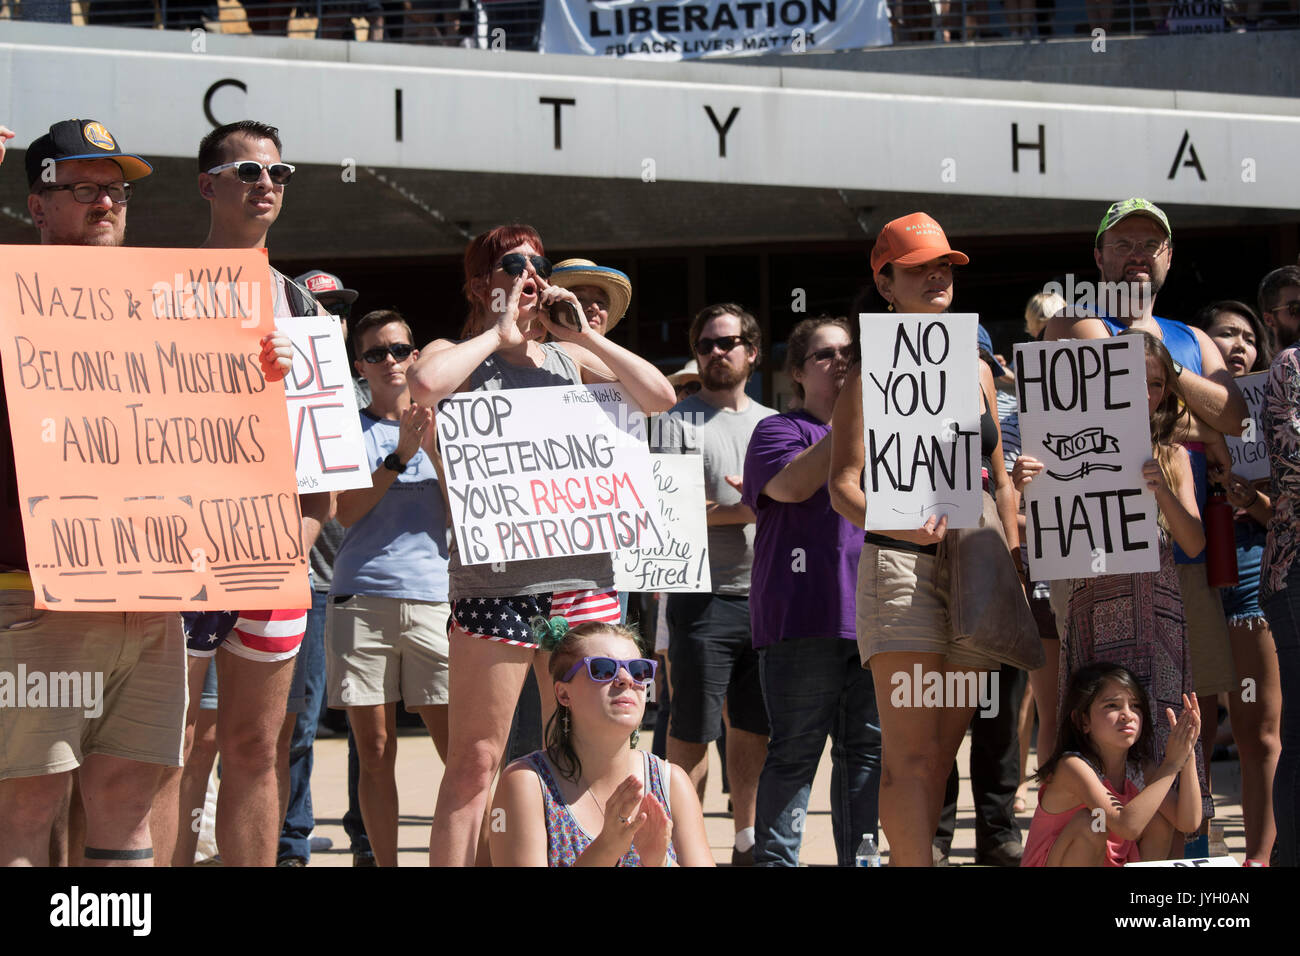 Activists and protesters converge on City Hall for a hot two-hour rally against racism and President Donald Trump's apparent insensitive comments about recent Charlottesville violence that left one dead. About 1,000 gathered in the August Texas heat. Stock Photo